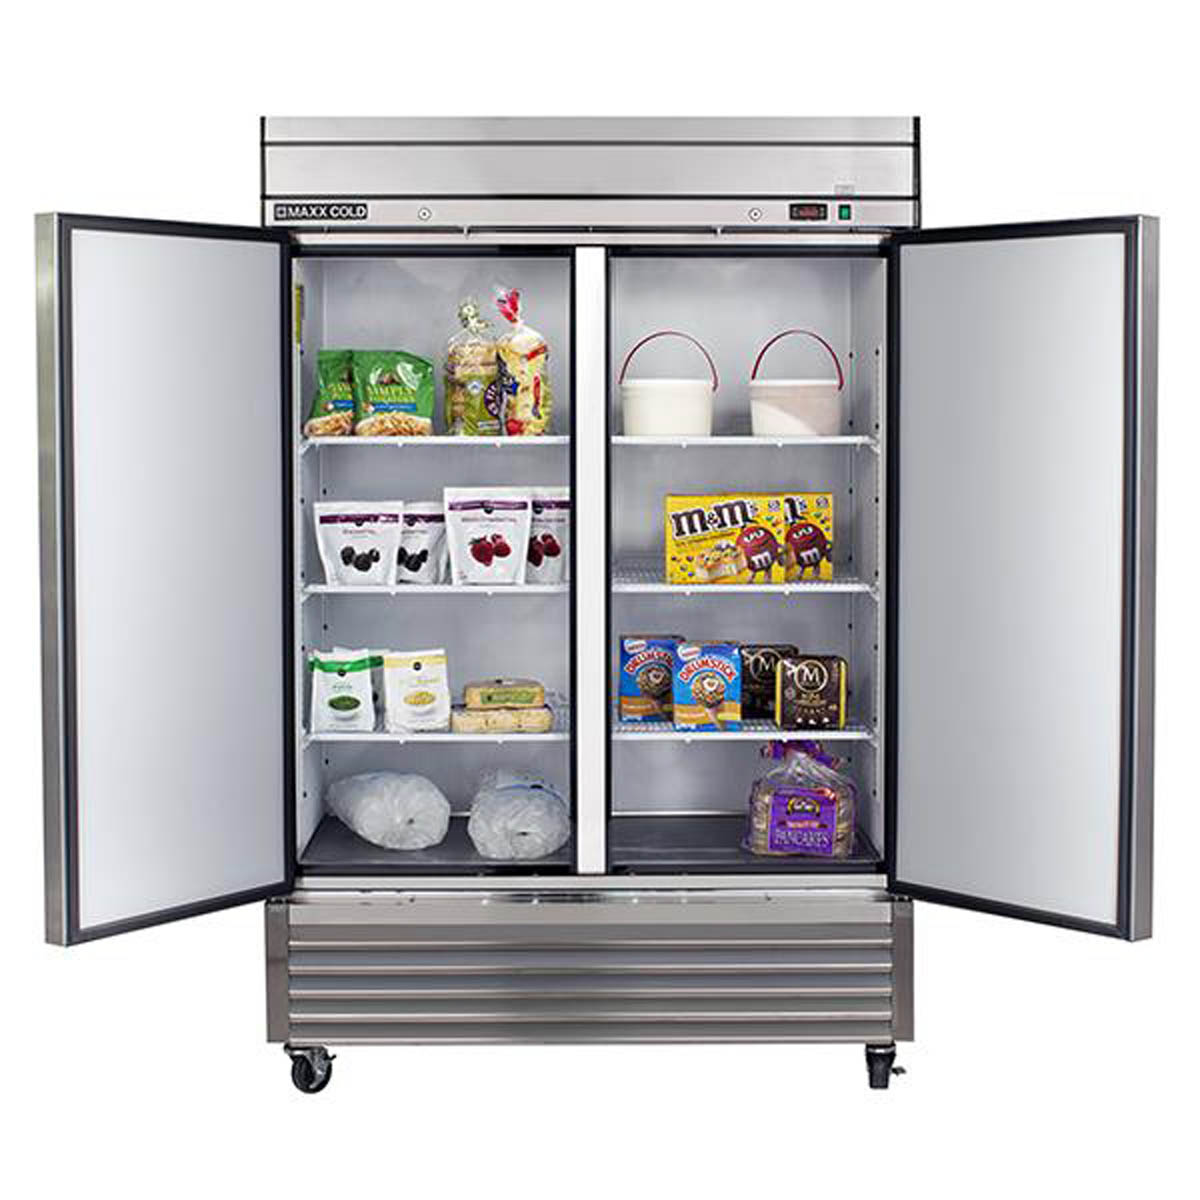 MAXX COLD - REACH-IN FREEZERS (Select Series)